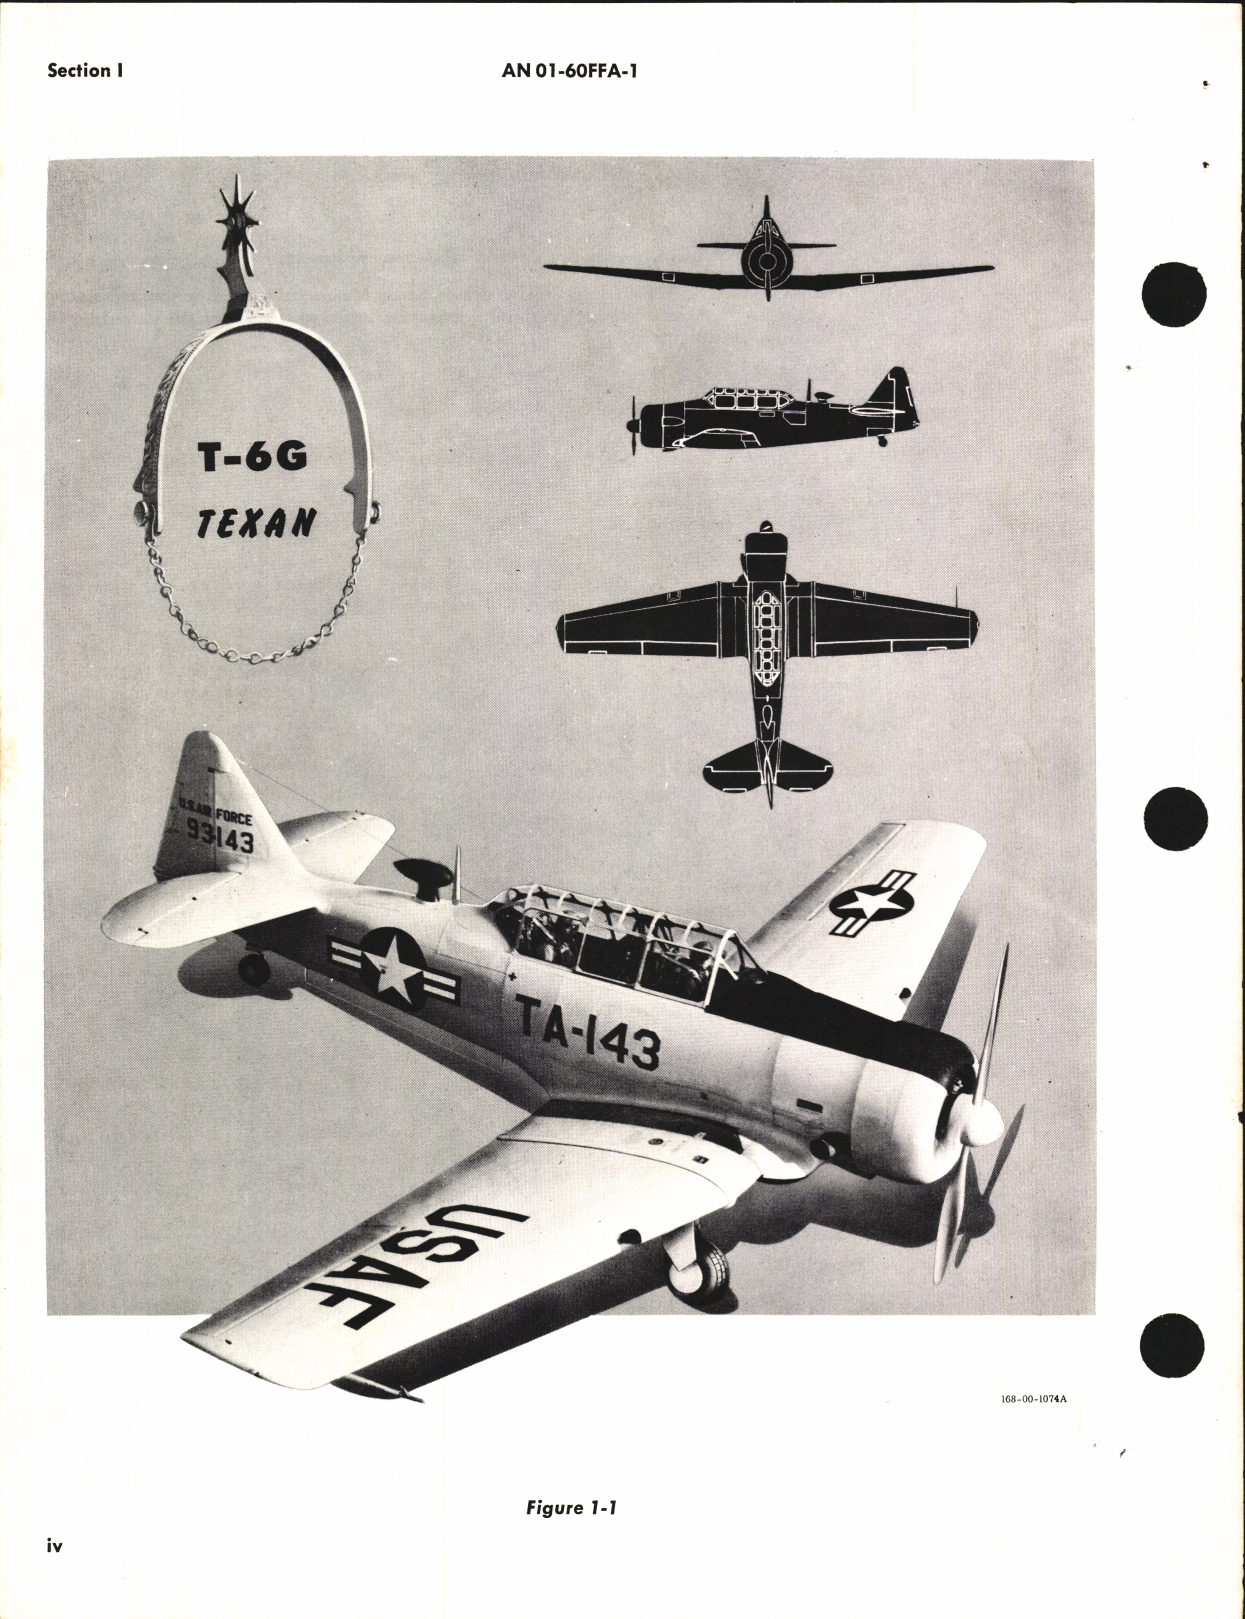 Sample page 6 from AirCorps Library document: Flight Handbook for T-6G